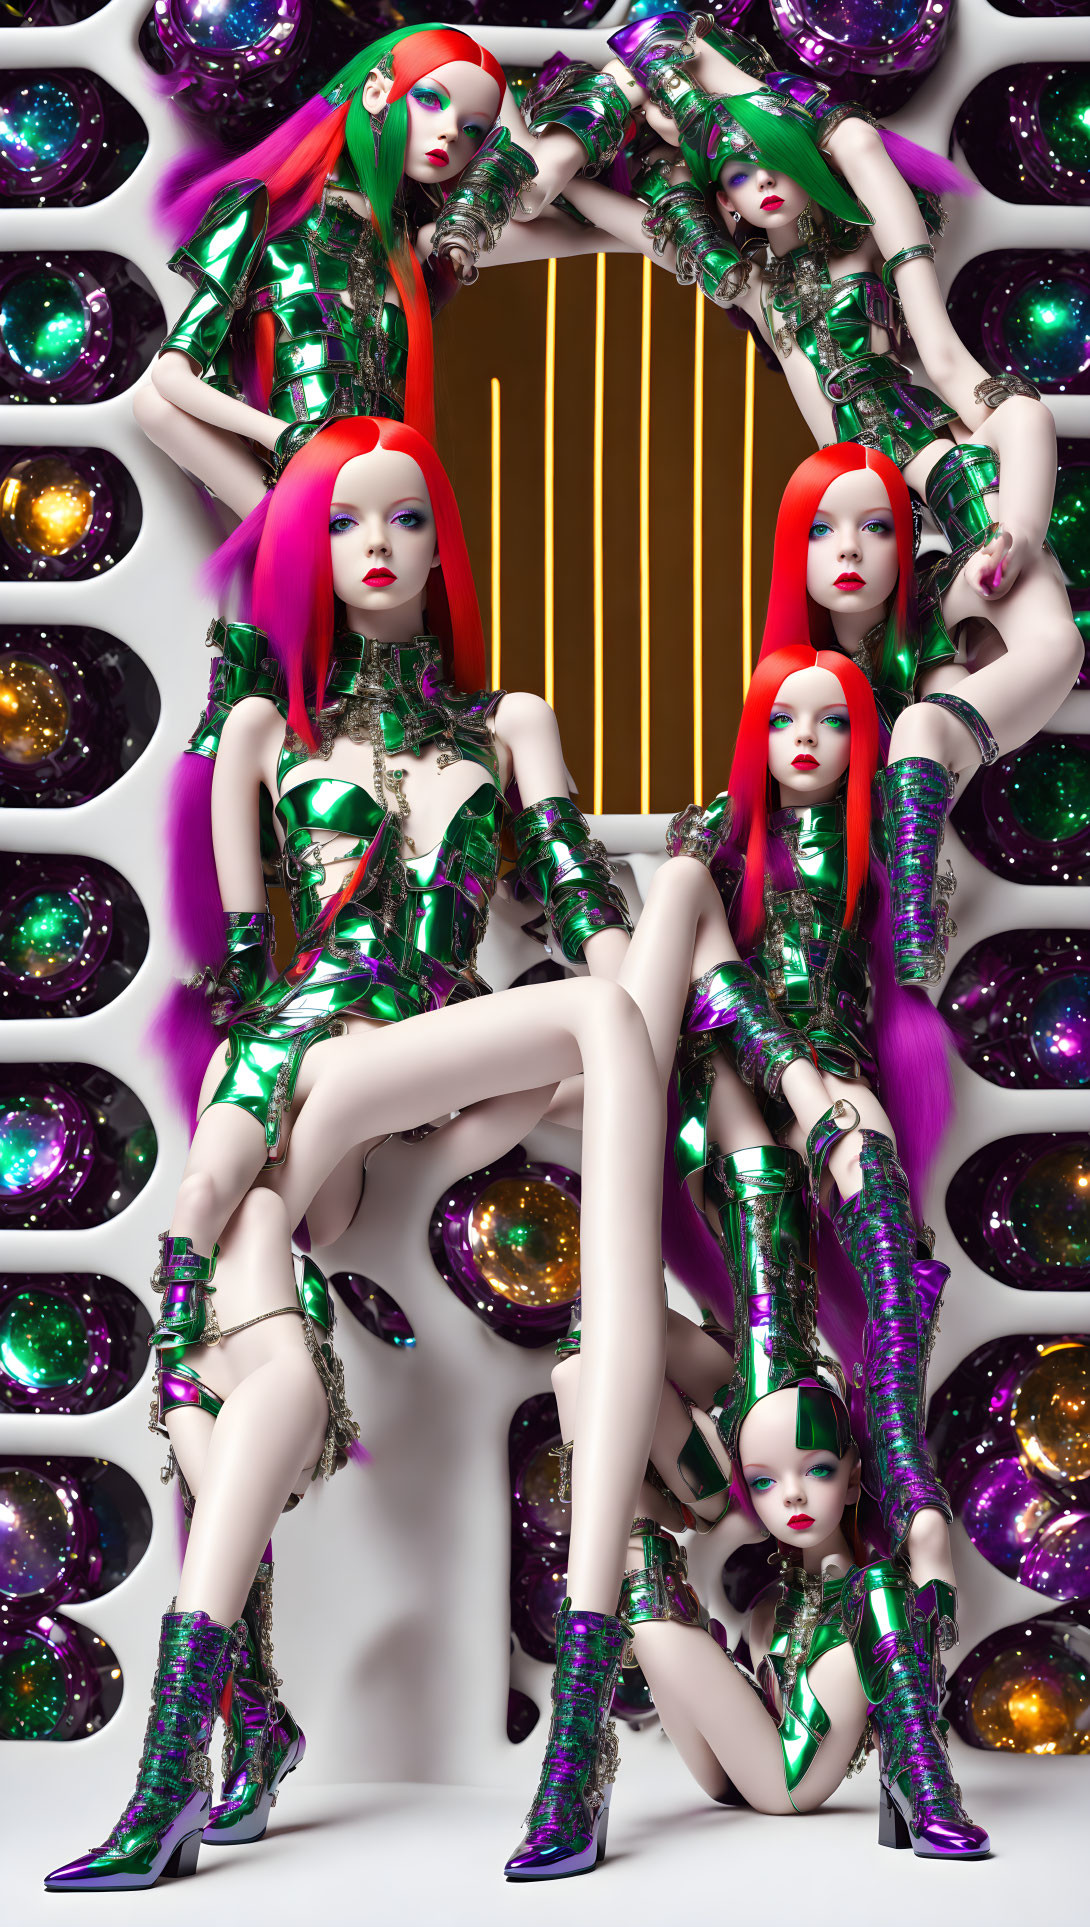 Symmetrical Futuristic Female Mannequins in Red Hair and Green Outfits